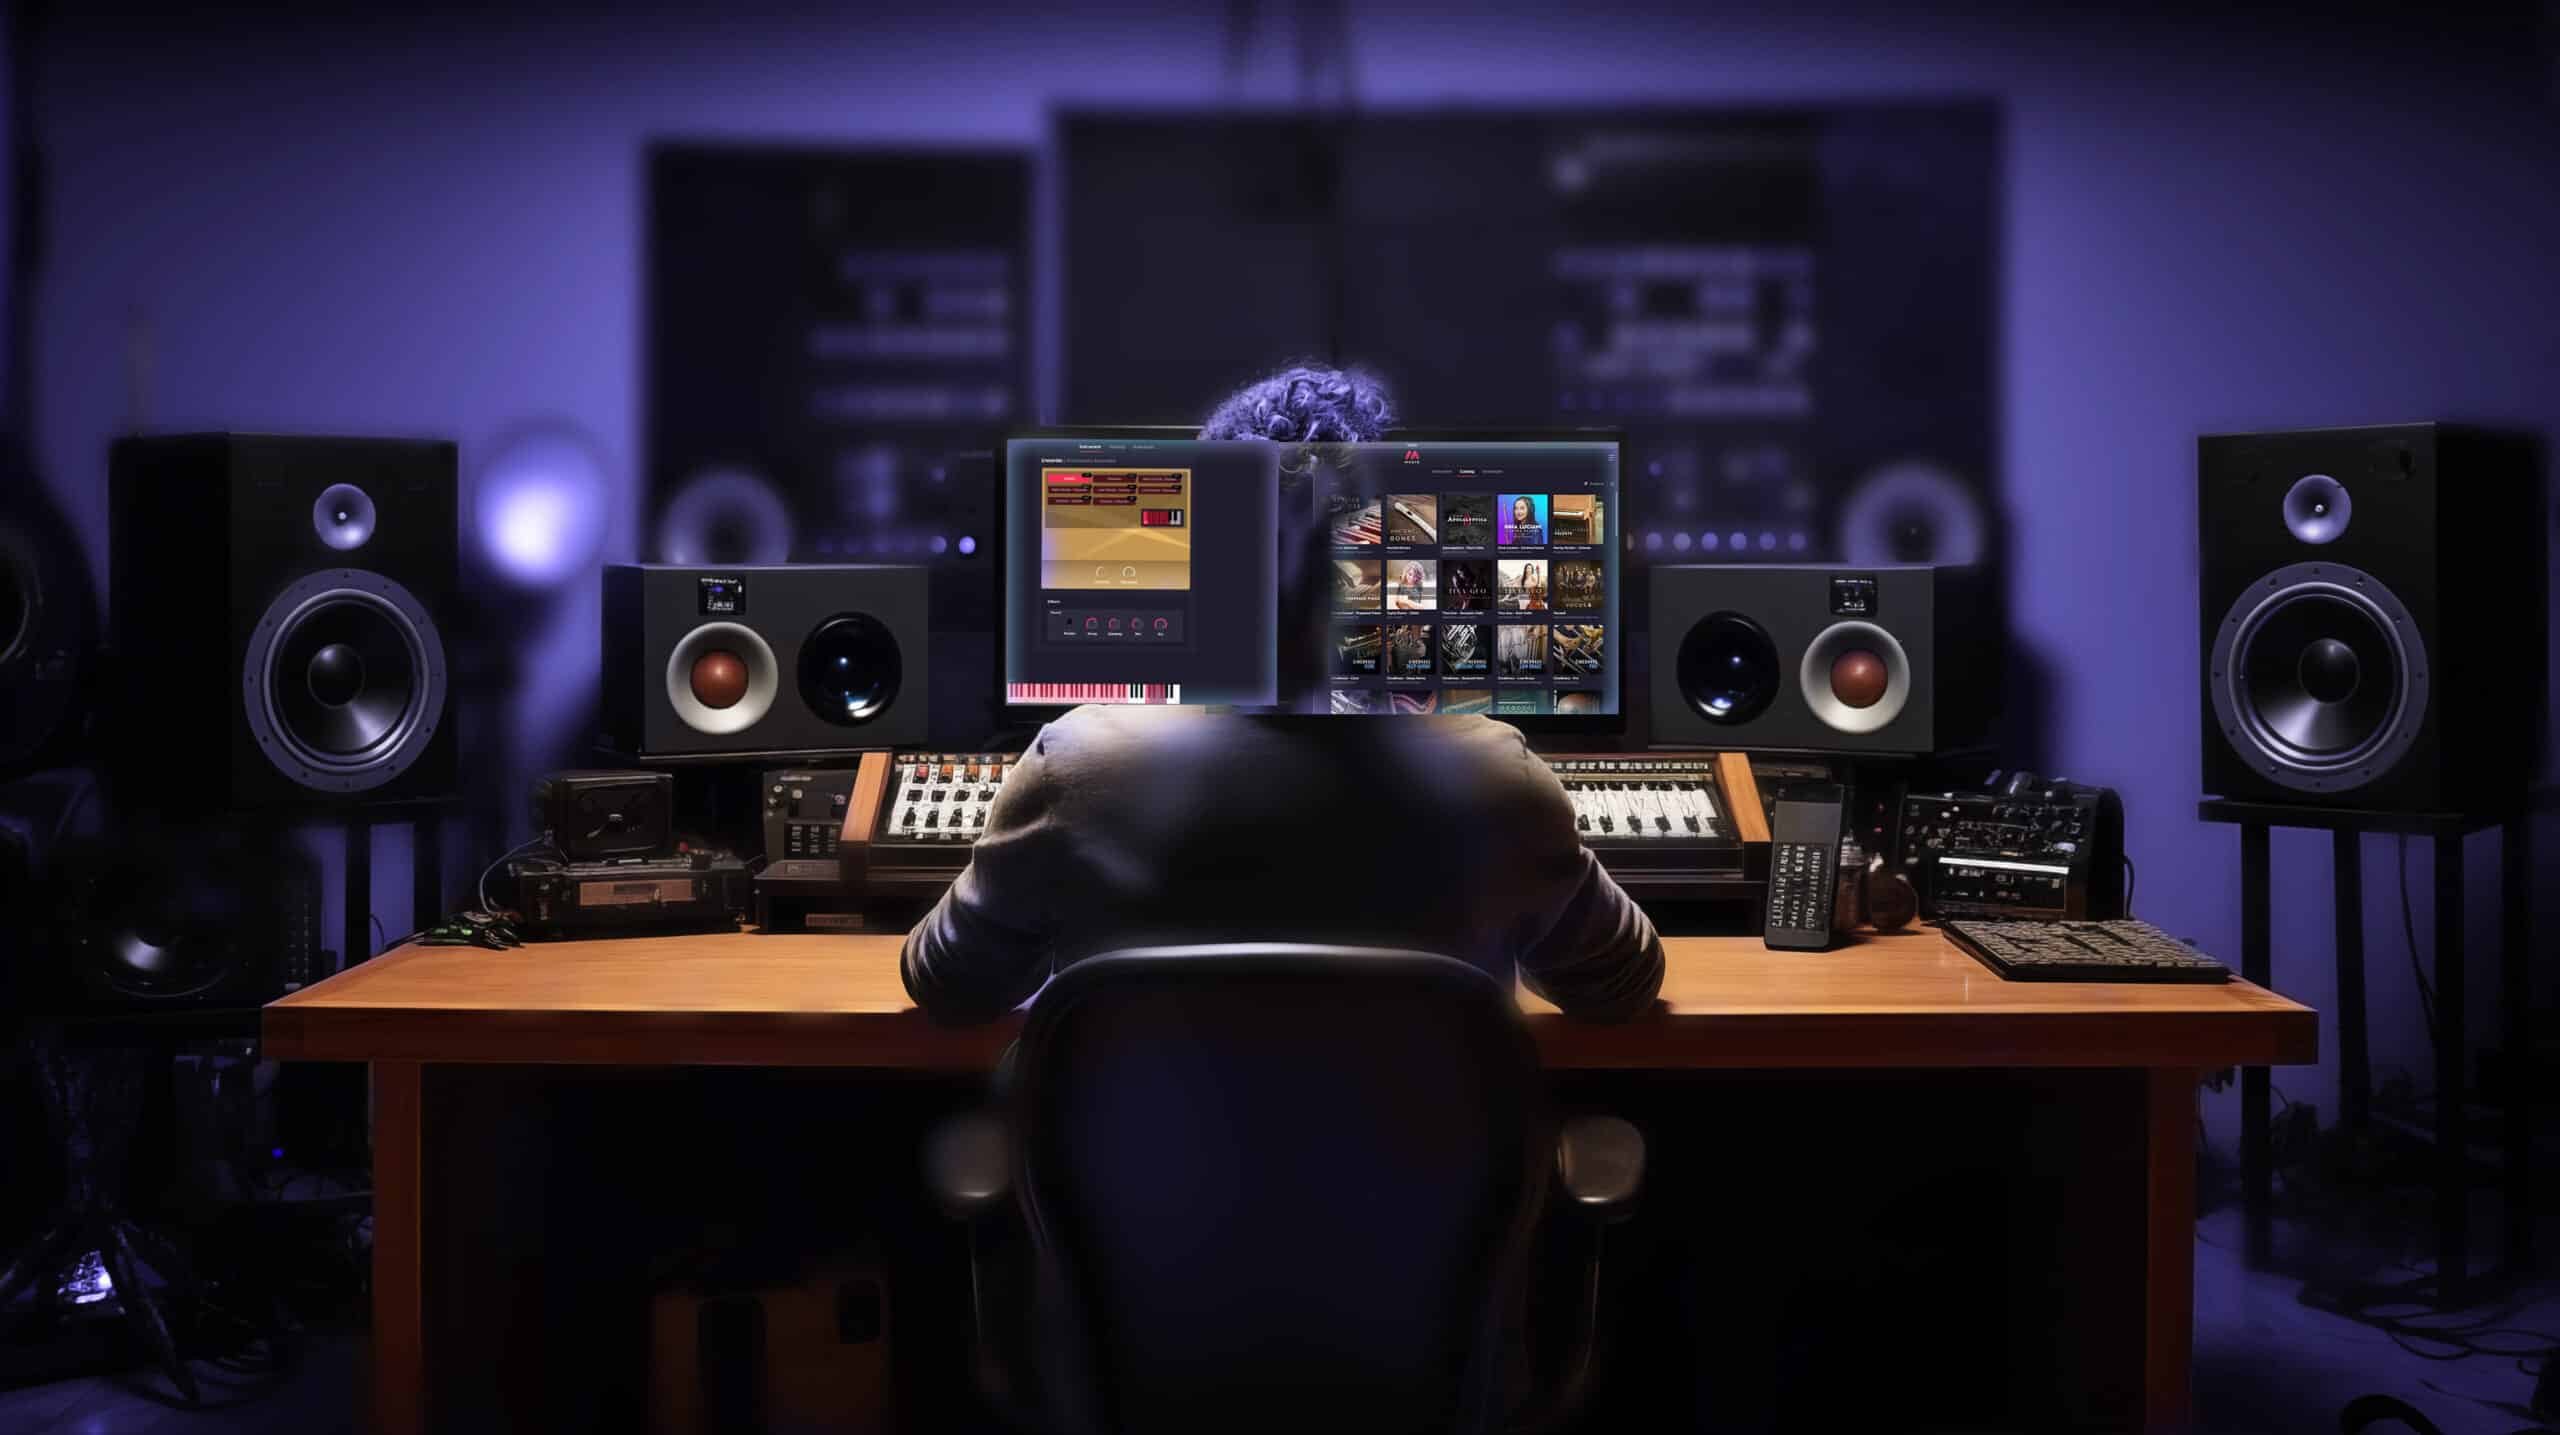 Music producer working with Musio software in a professional studio setup